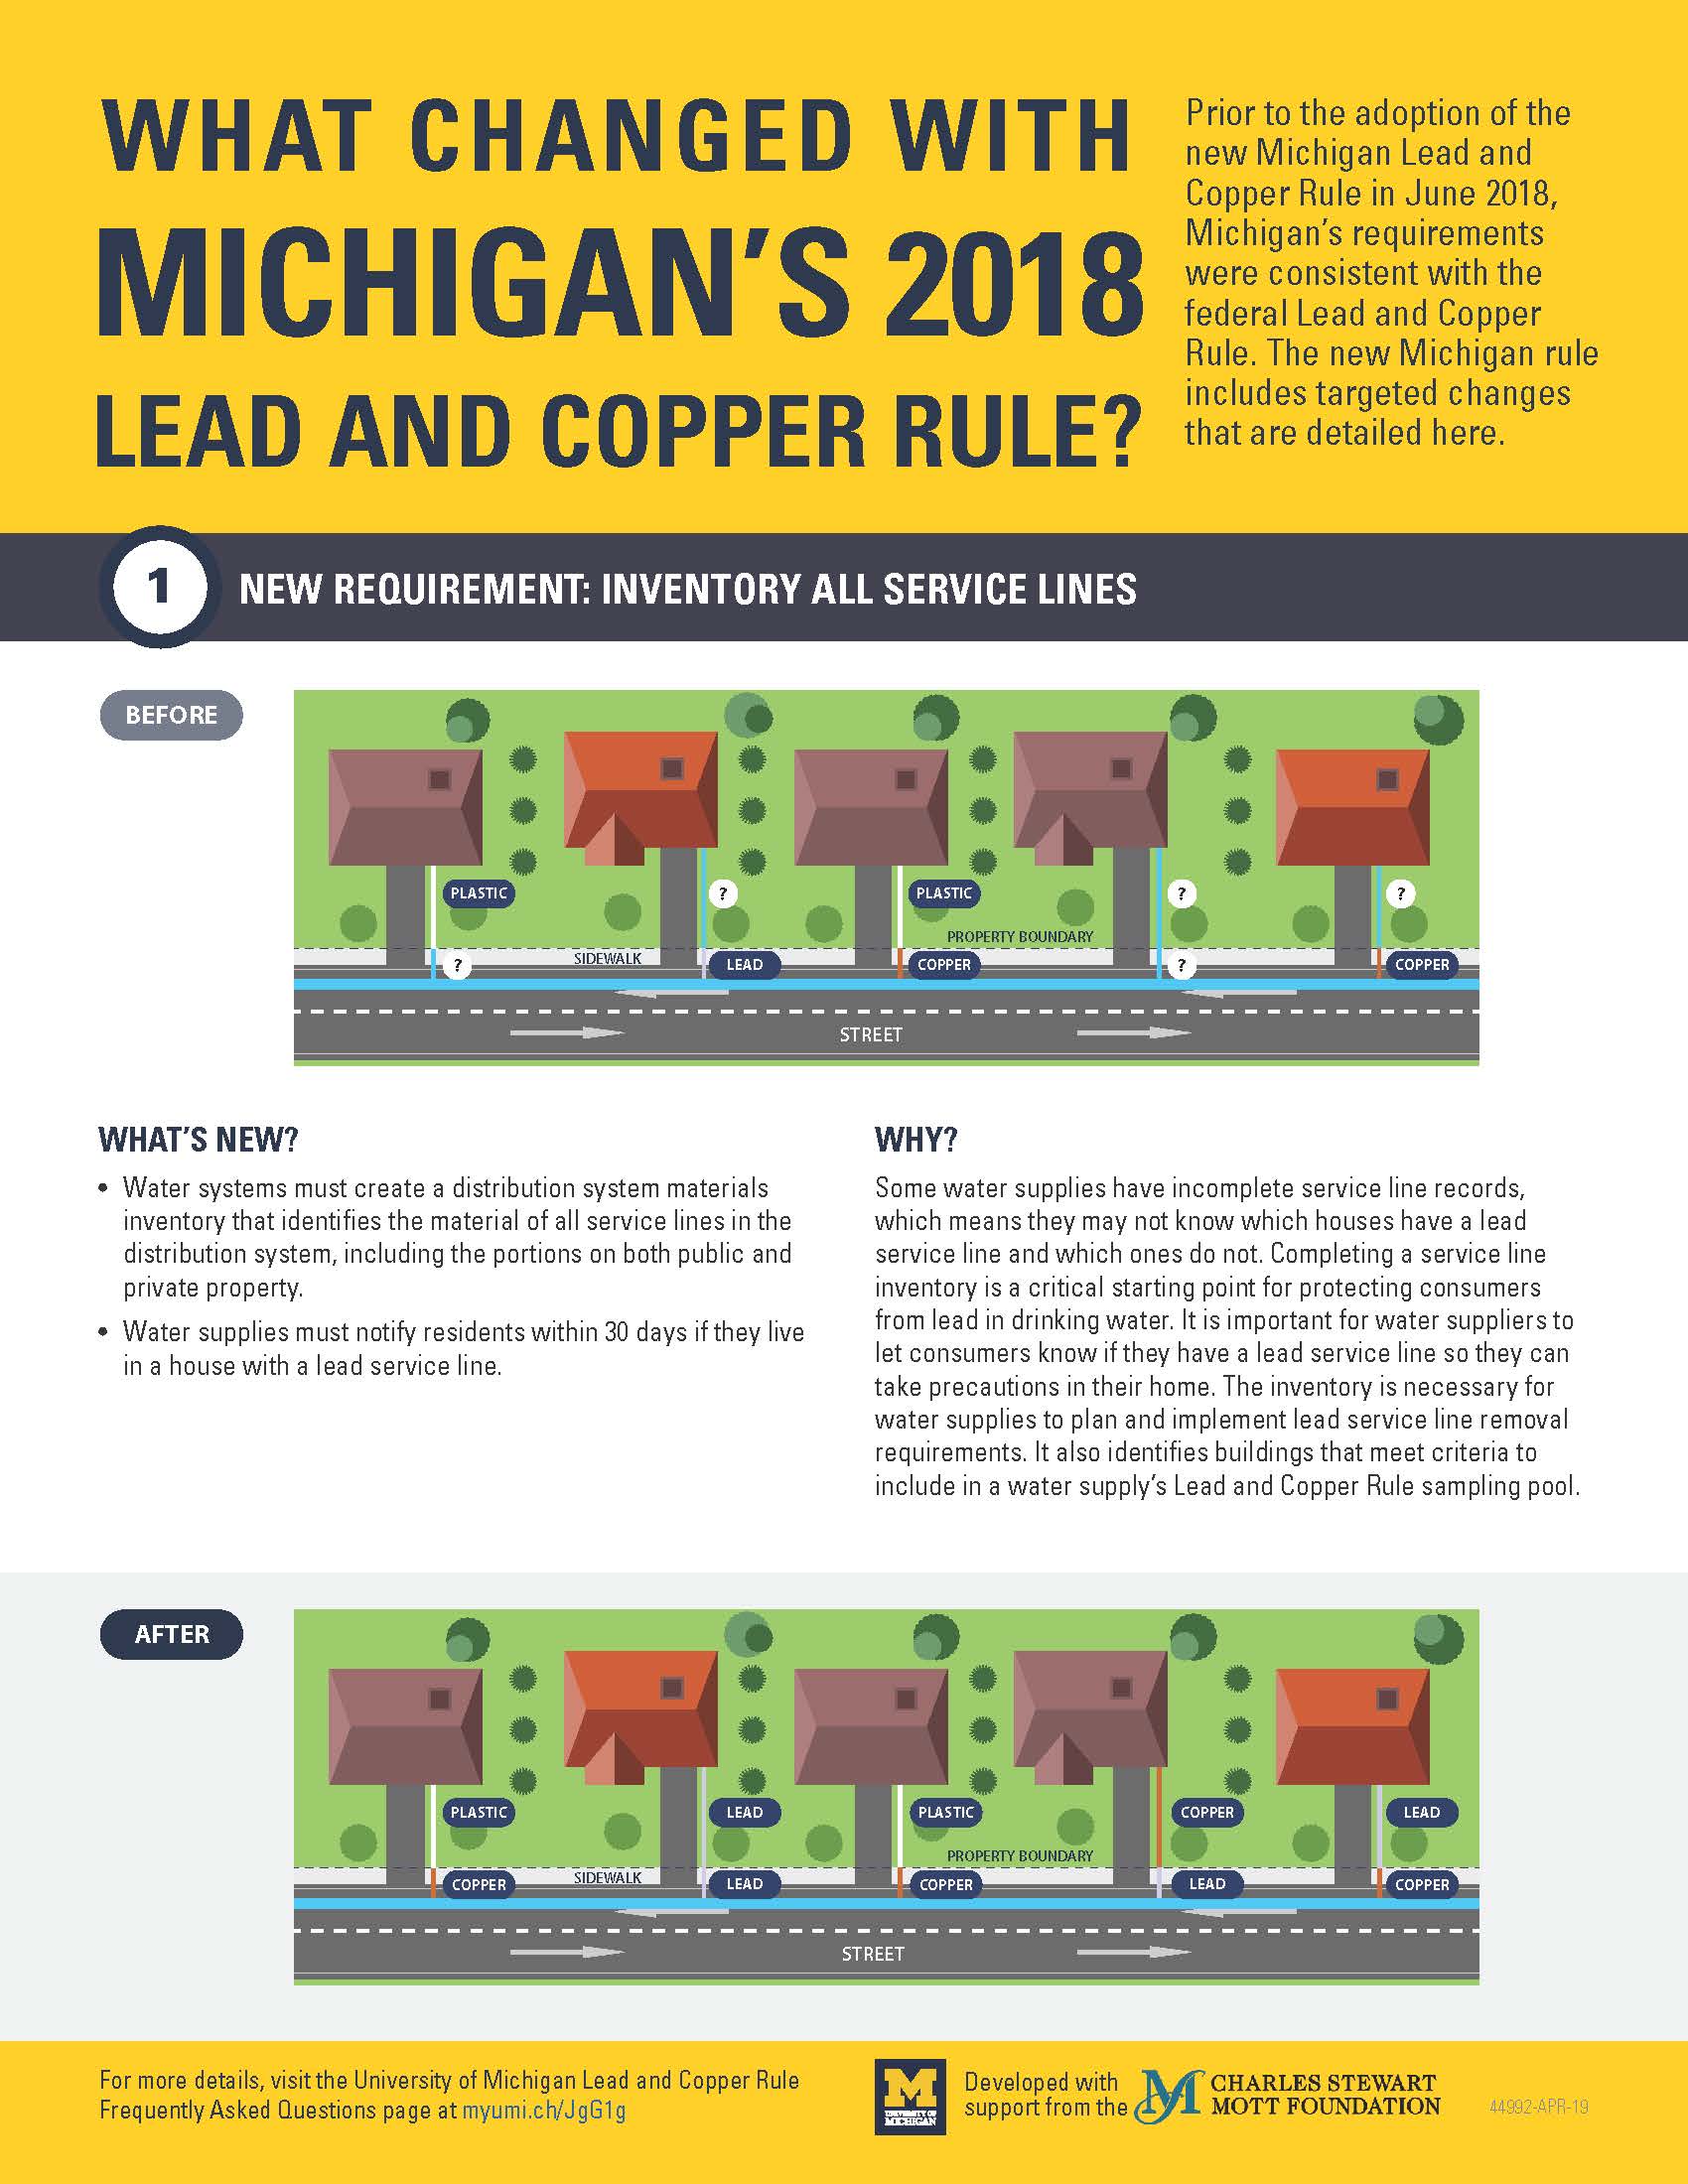 Infographic displaying information on Michigan's Lead and Copper Rule